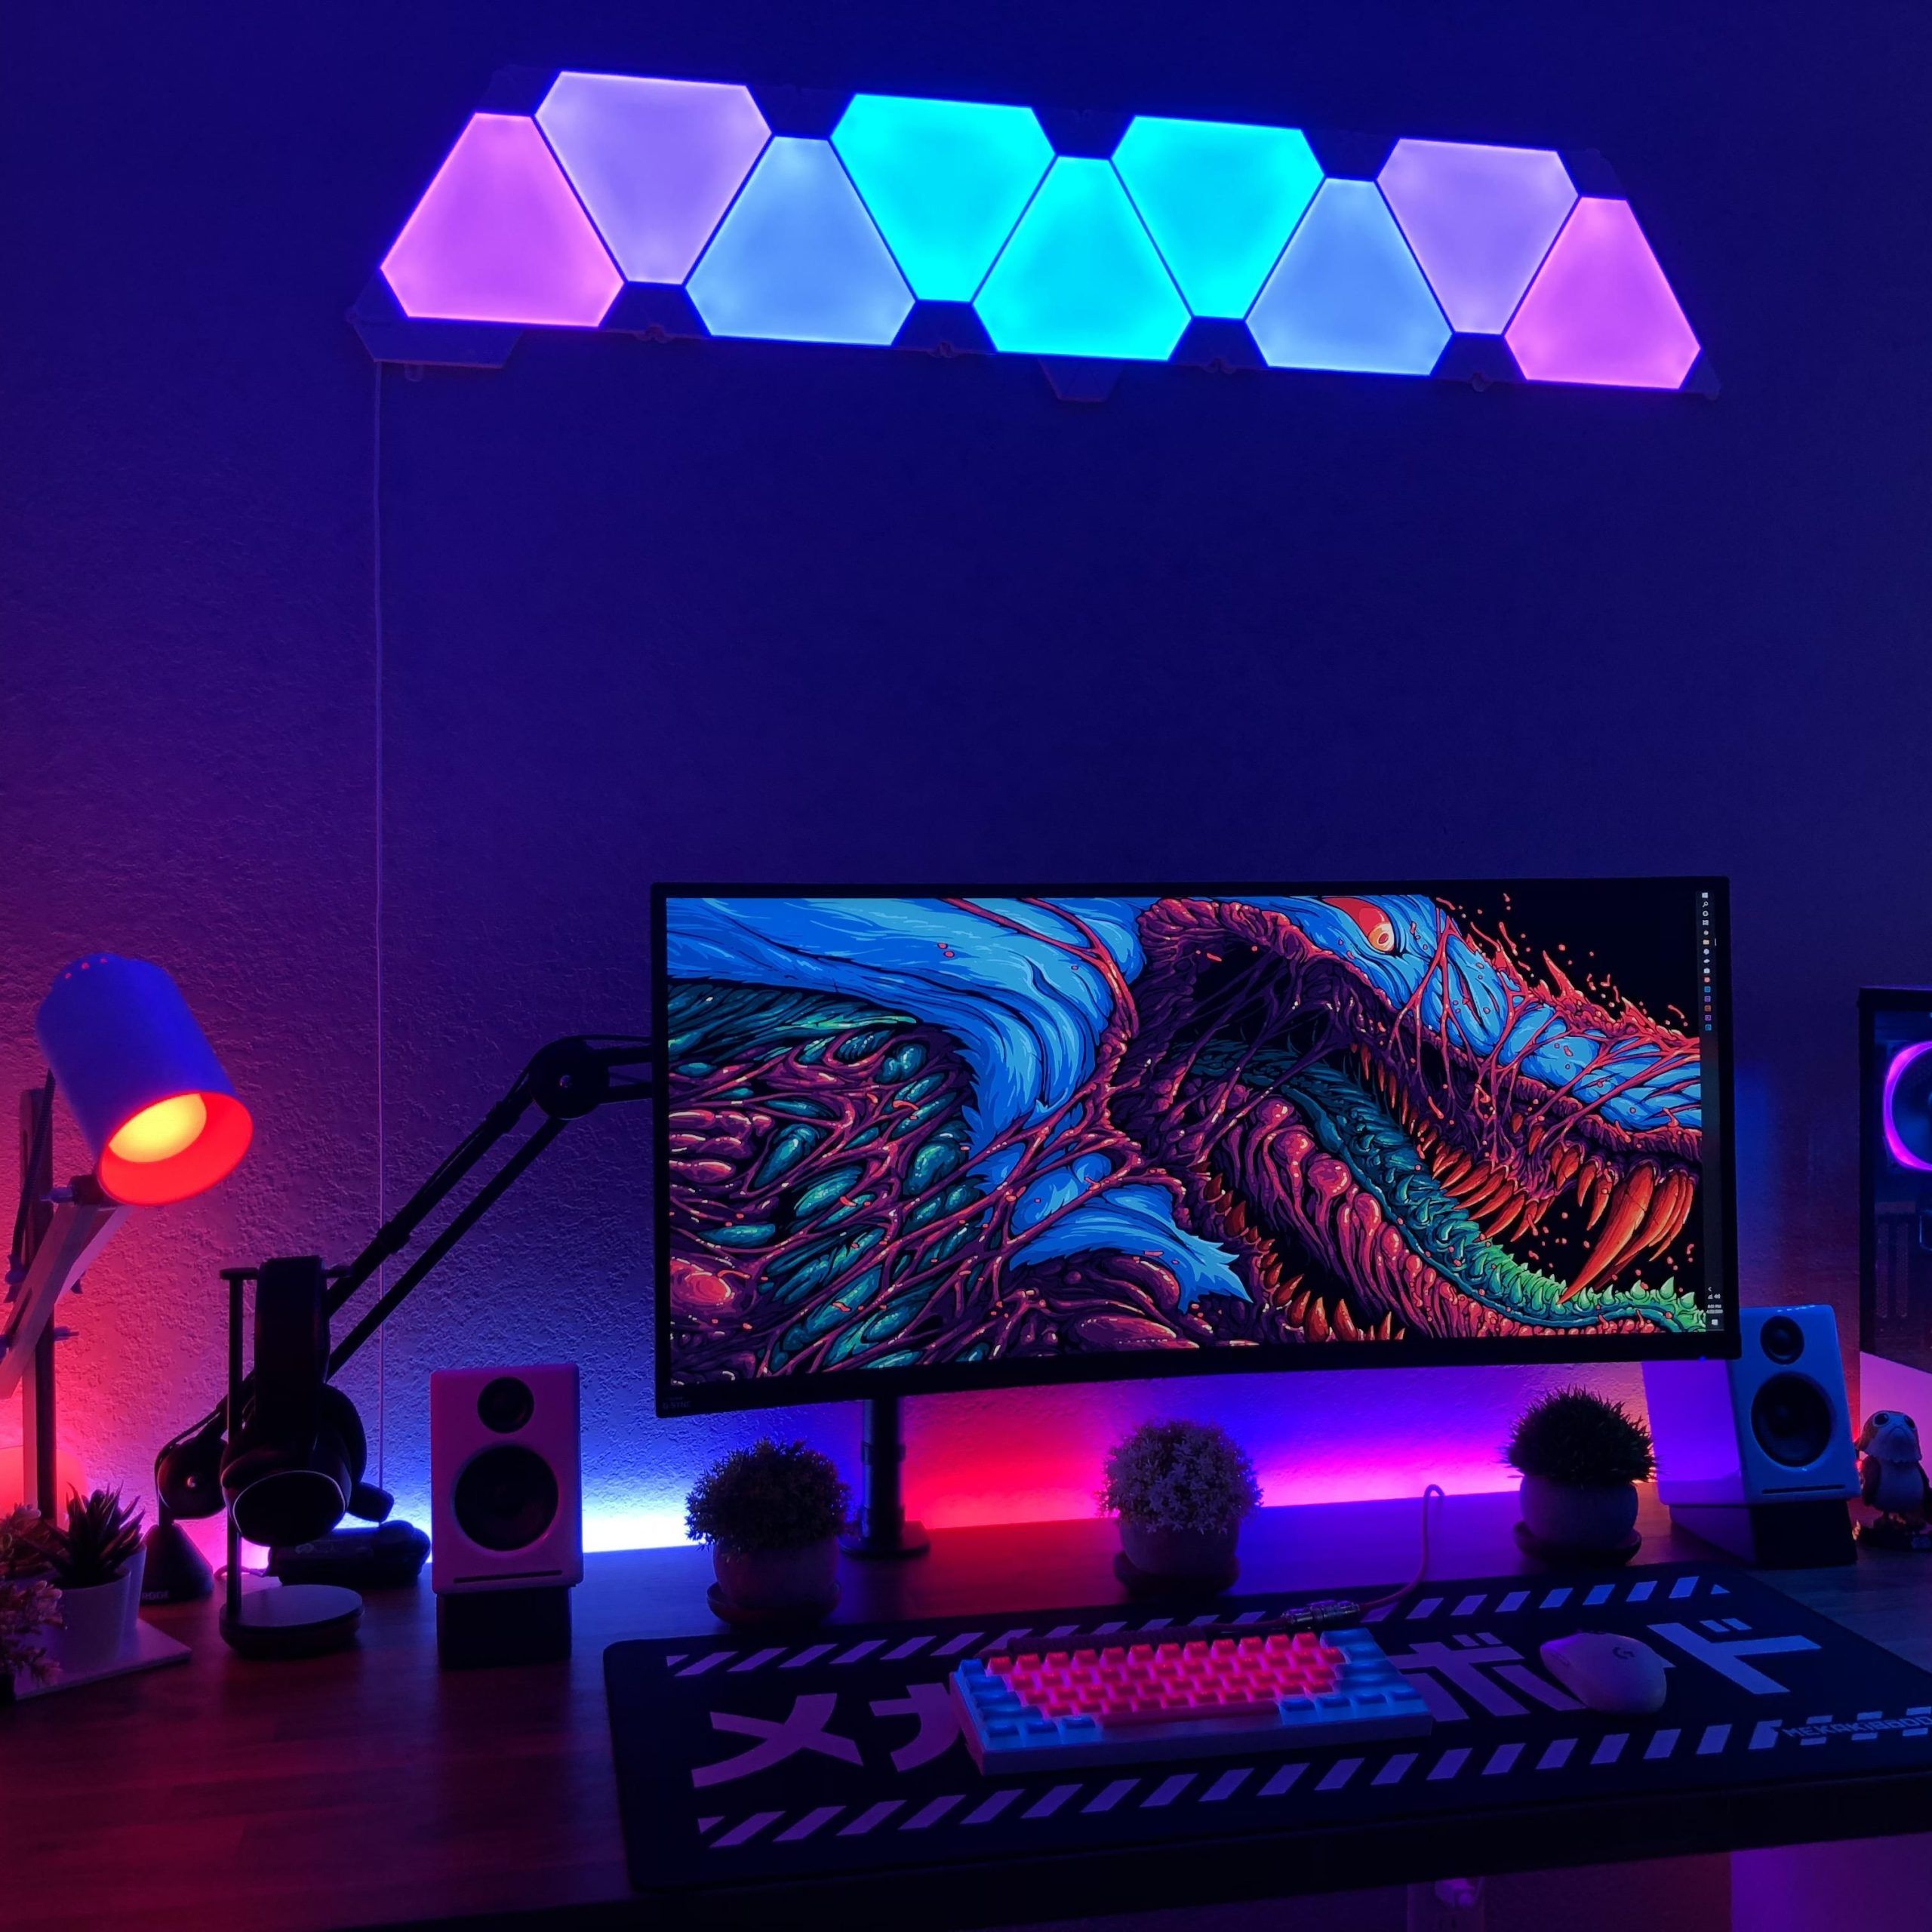 Rgb Increases Your Fps Right? | Game Room Design, Gamer Room Decor, Pc Inside Black Rgb Entertainment Centers (View 16 of 20)